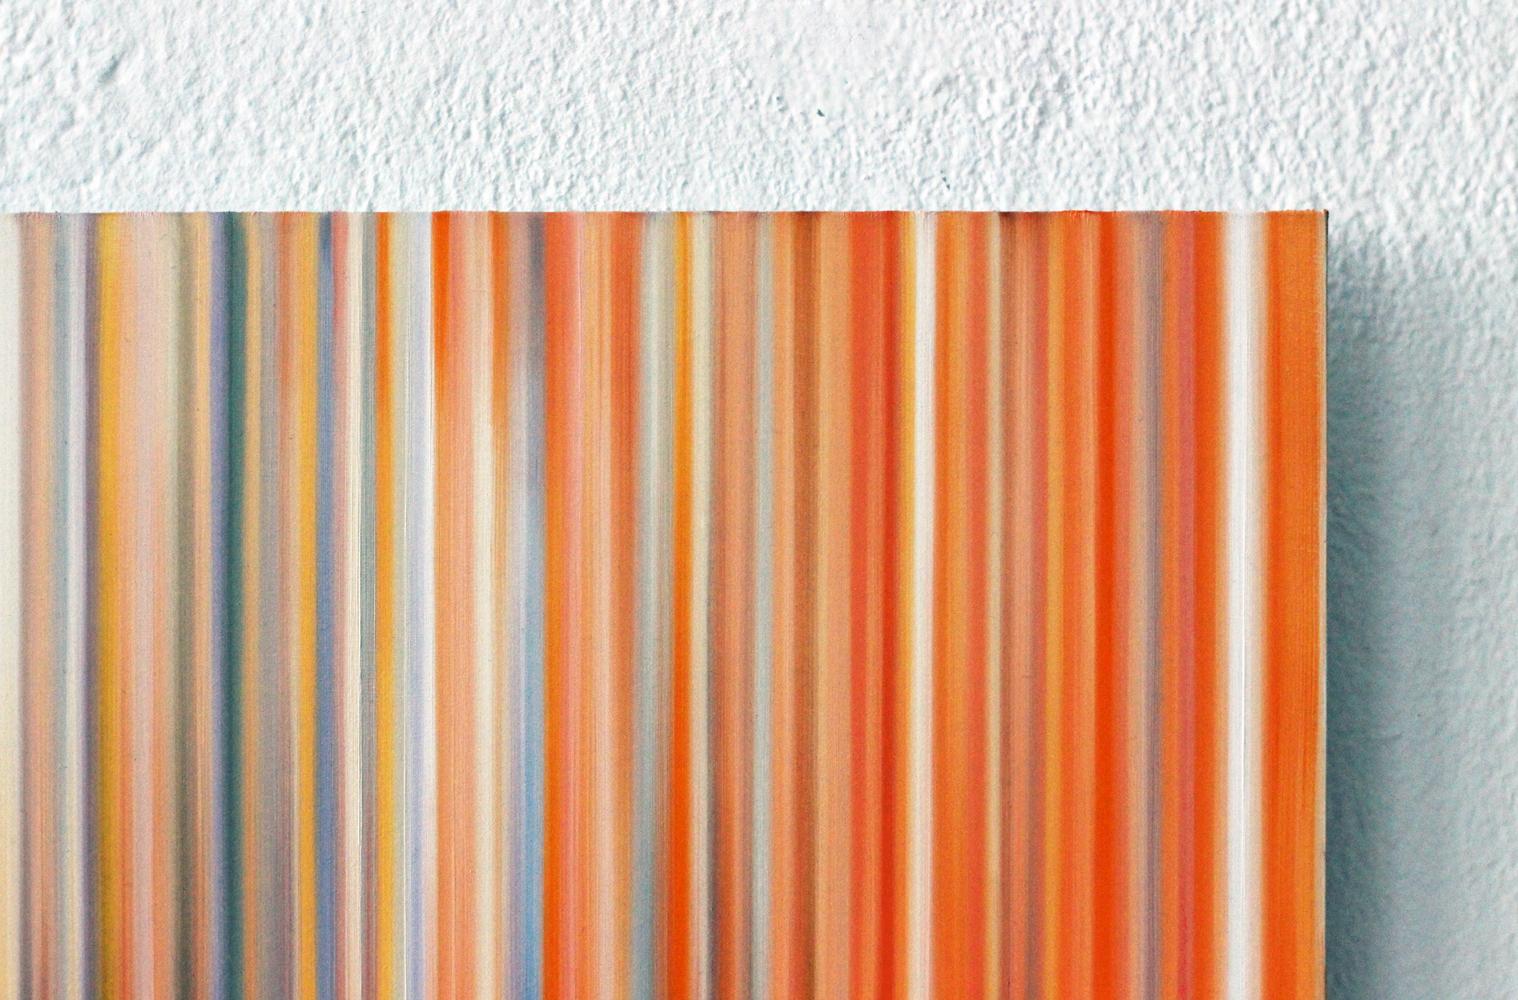 Oil on Alu-Dibond, 45 x 45 cm.
German artist Doris Marten explores the visual effects created by the harmony between light and color. Lines and the light are the main components of her paintings. But in the Light'n'Lines series, the raw material is